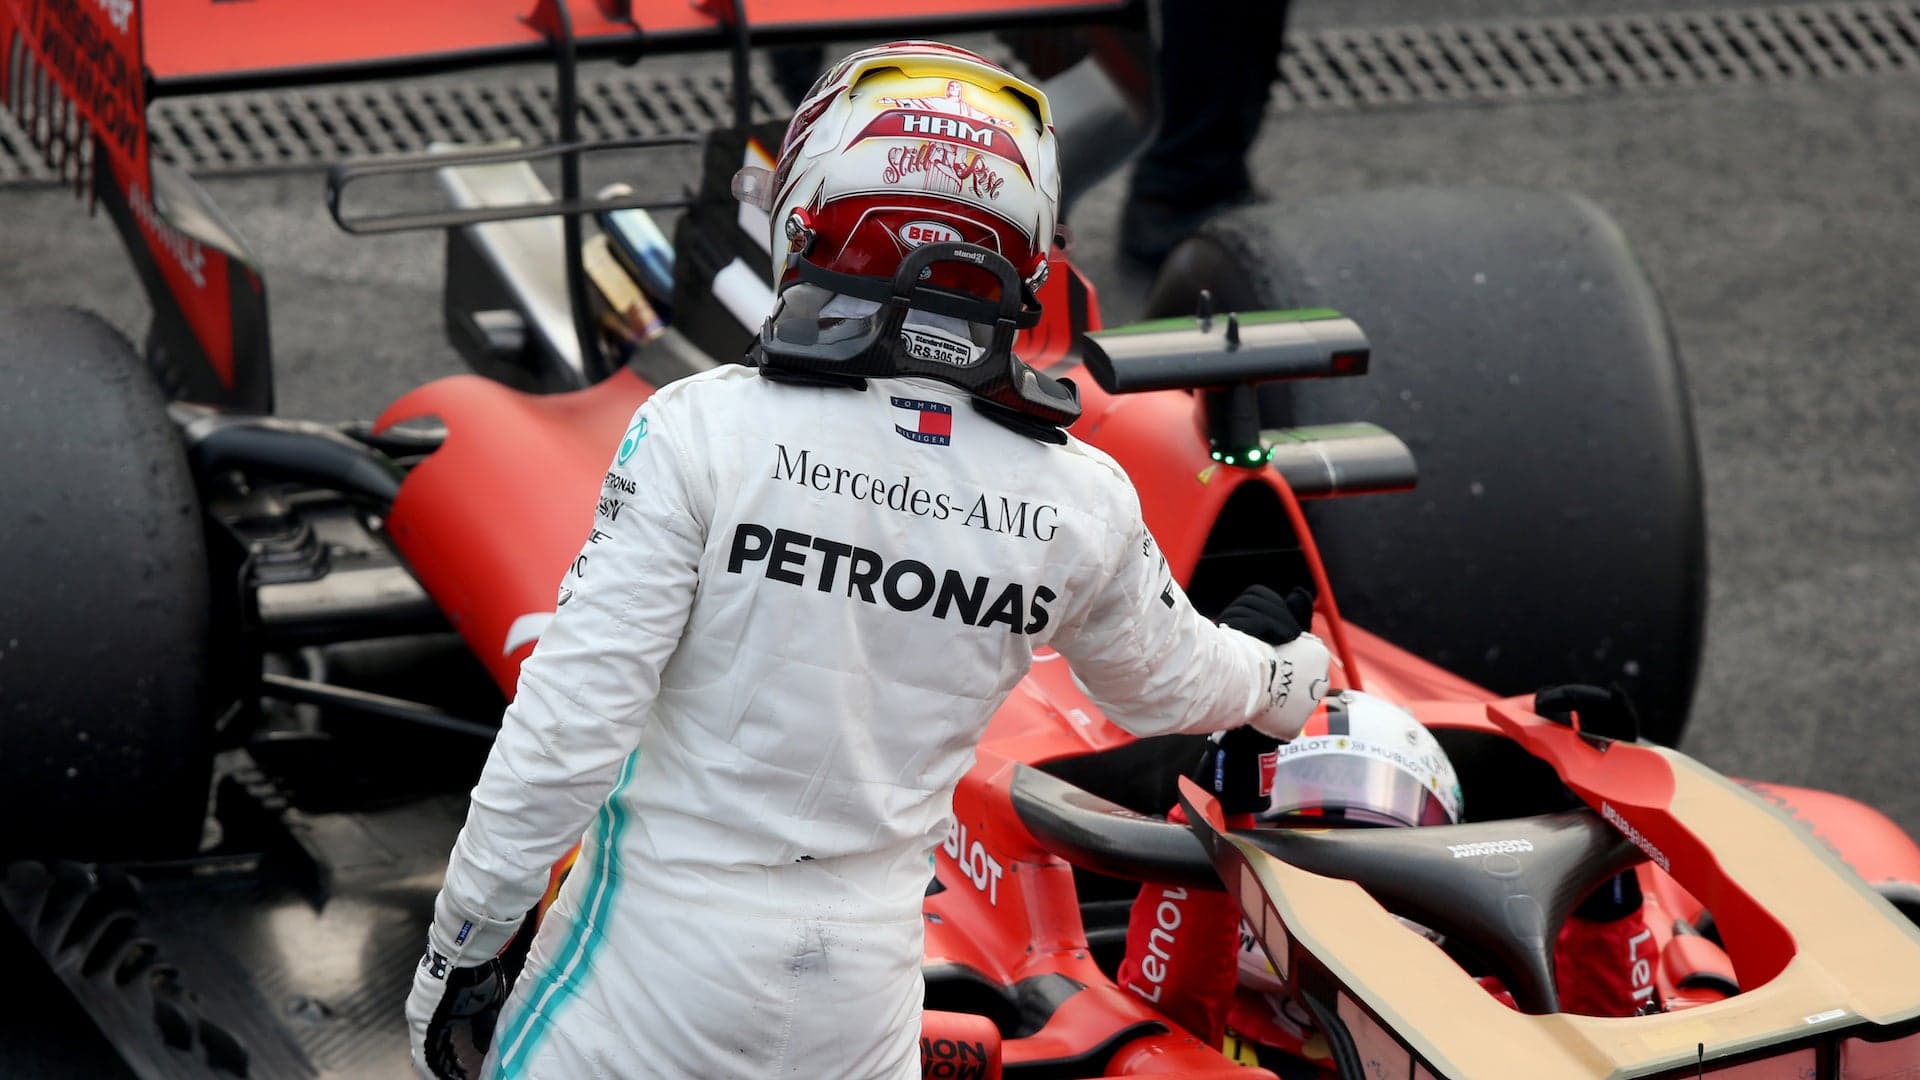 Lewis Hamilton’s Rumored Move to Ferrari Casts Doubt on Mercedes-AMG’s F1 Future